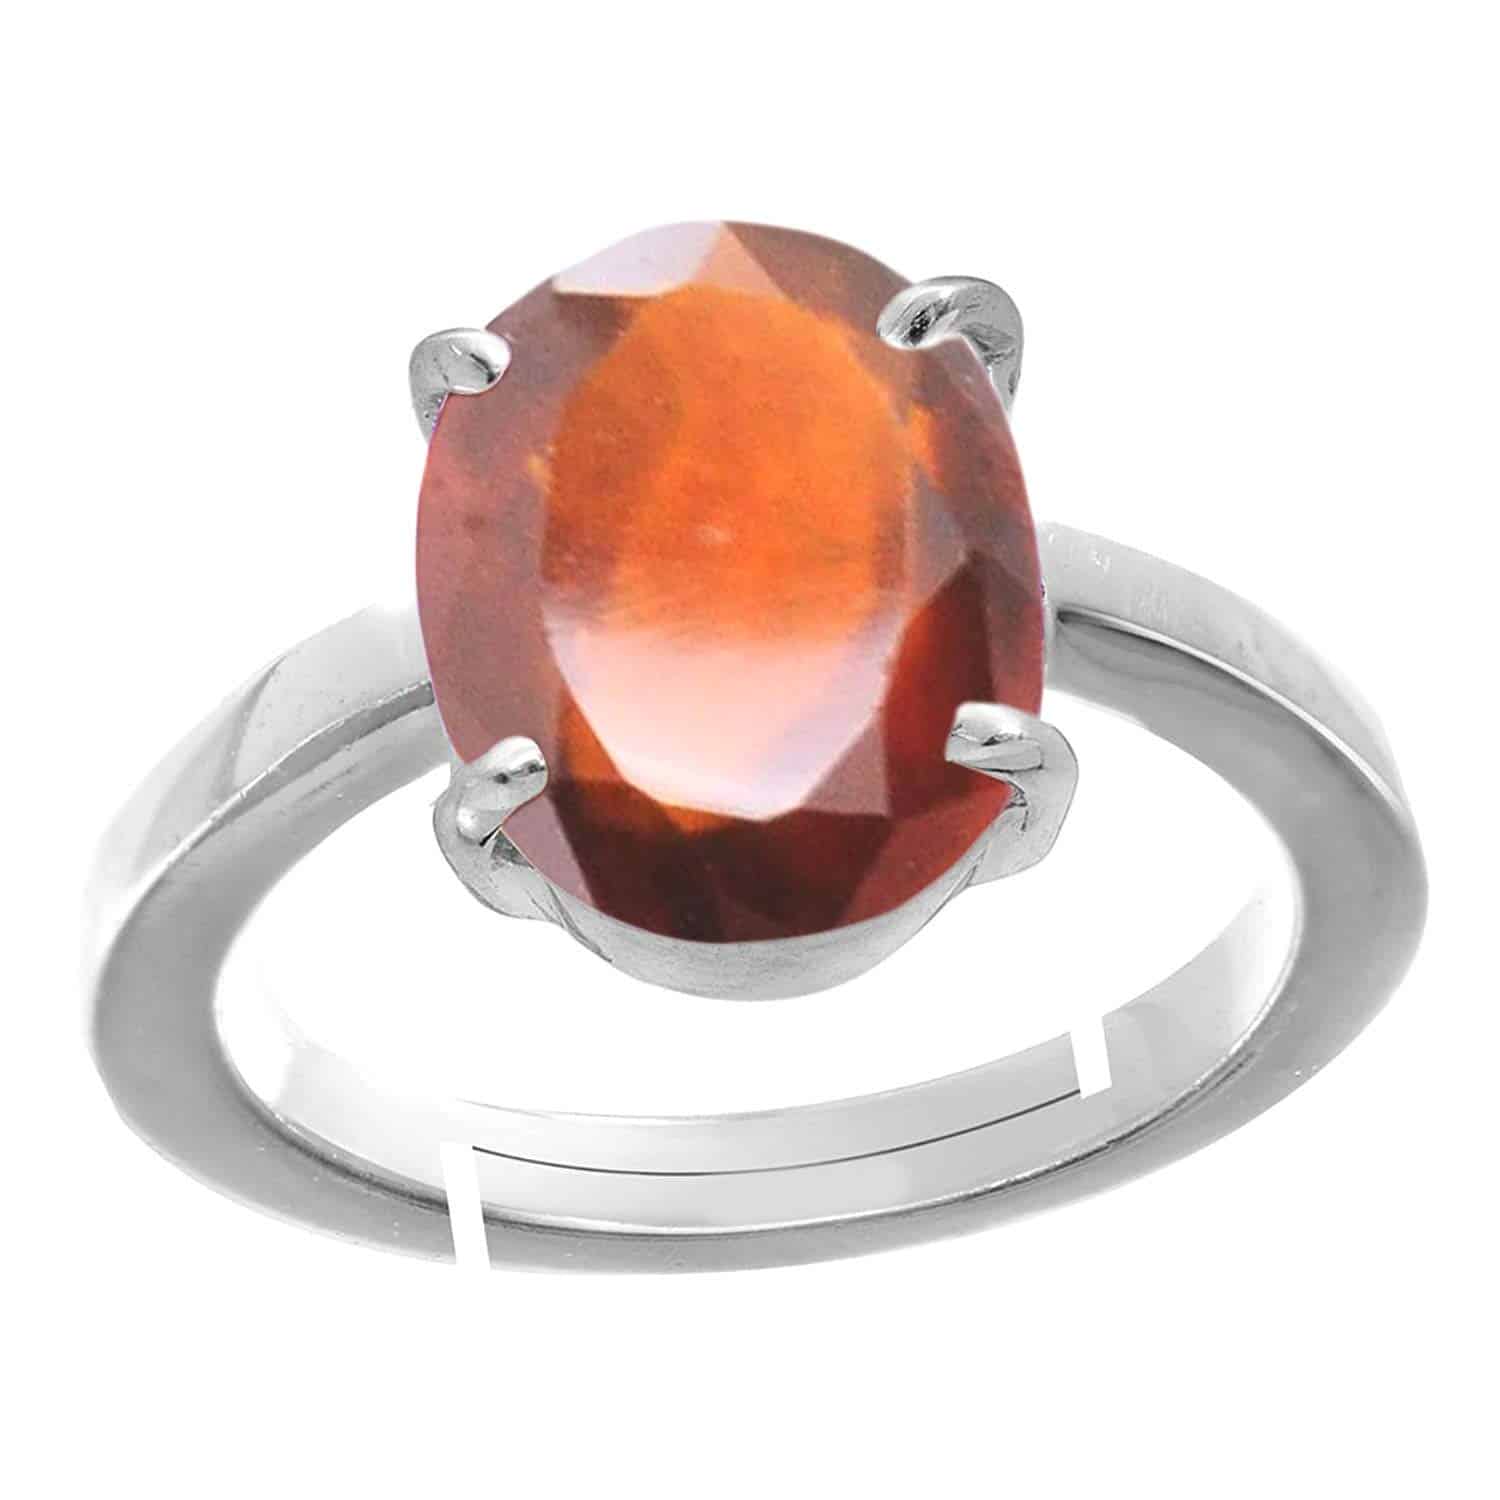 KUNDLI GEMS Gomed Ring 6.25 ratti stone Precious Effective Good quality  stone Certified For unisex Stone Garnet Gold Plated Ring - Price History